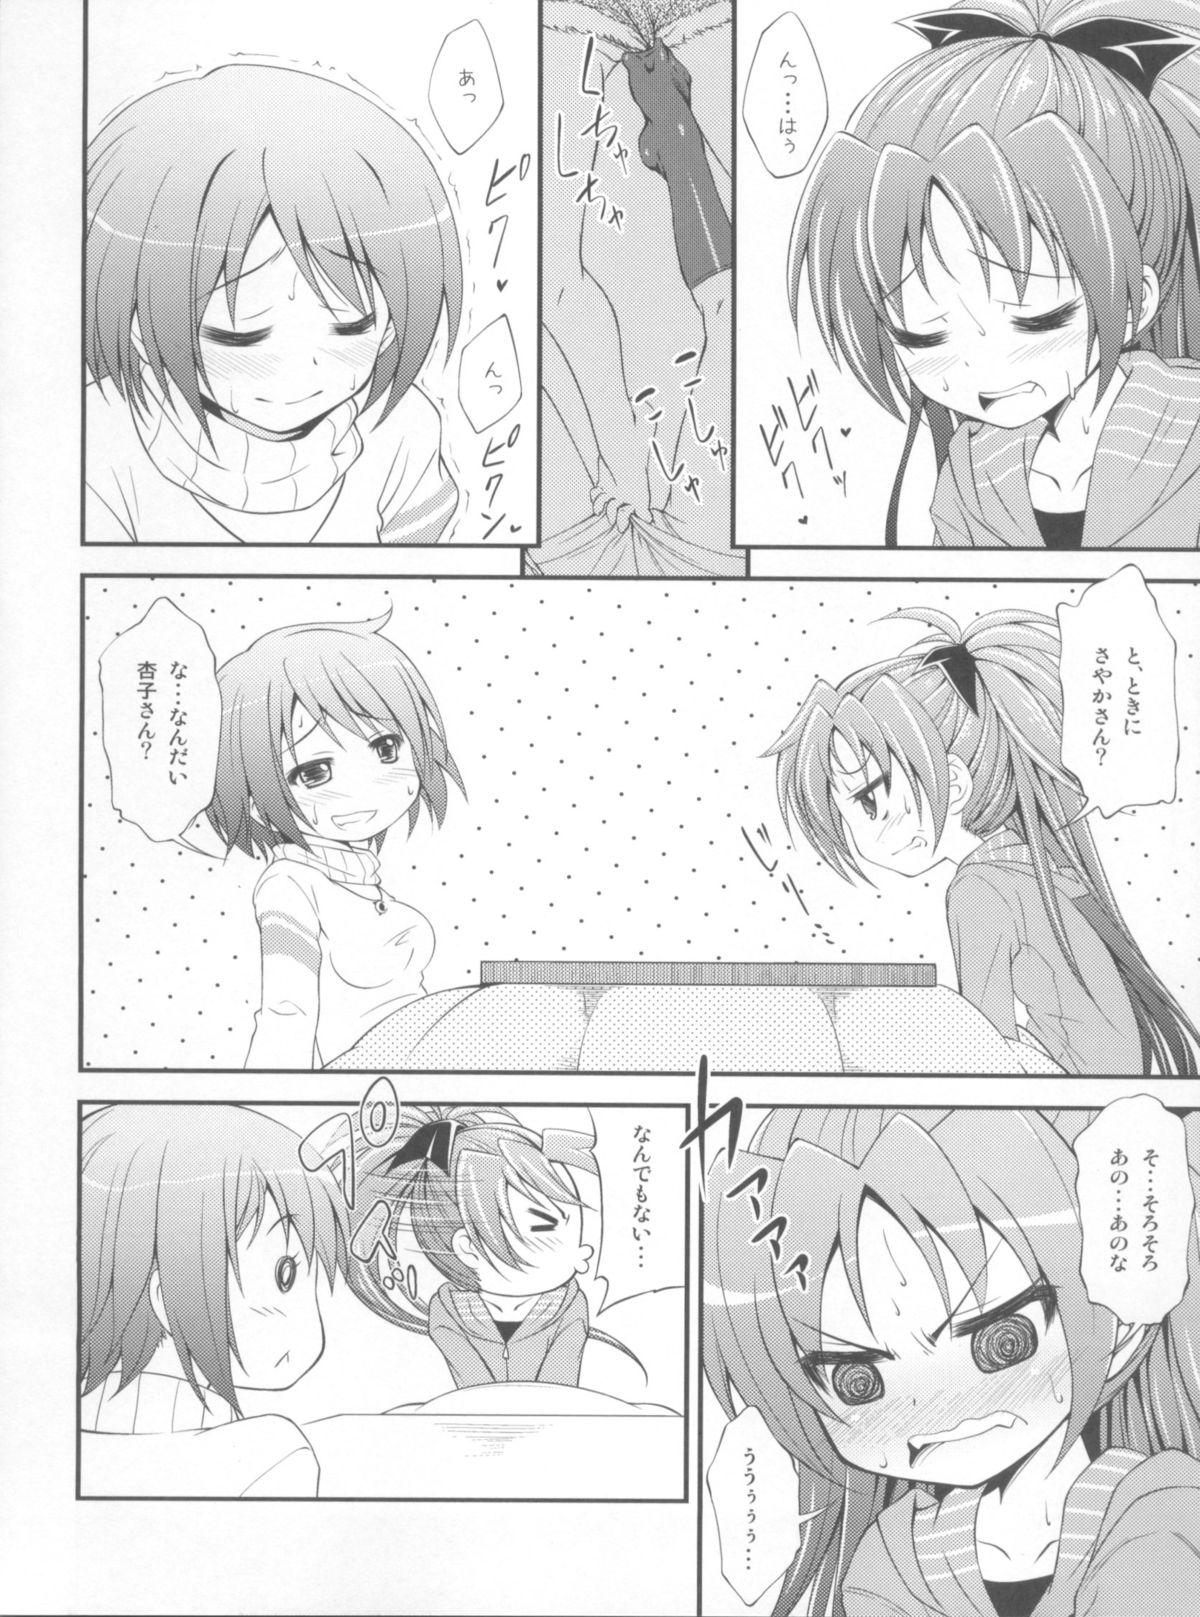 Assfucking Lovely Girls' Lily vol.3 - Puella magi madoka magica Anal Creampie - Page 9